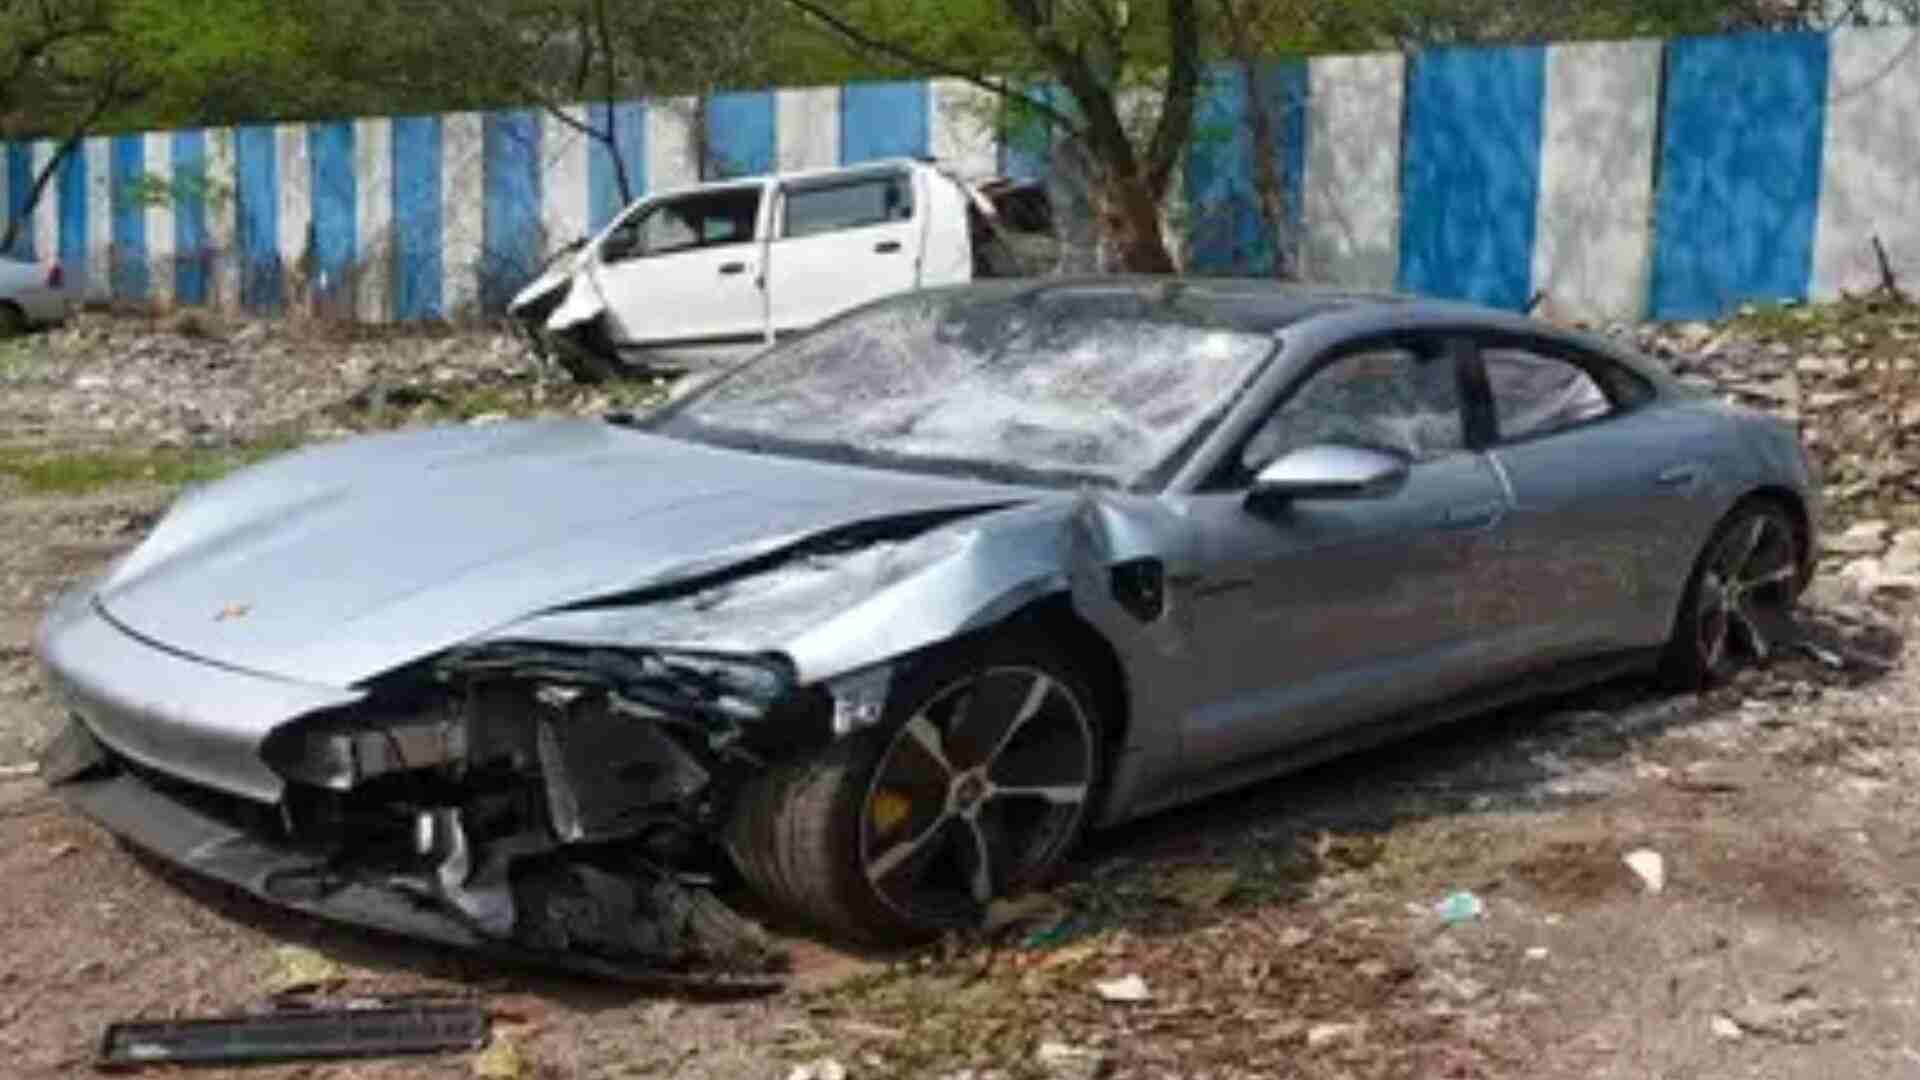 Pune Porsche Crash: Another Detained For Blood Sample Tampering